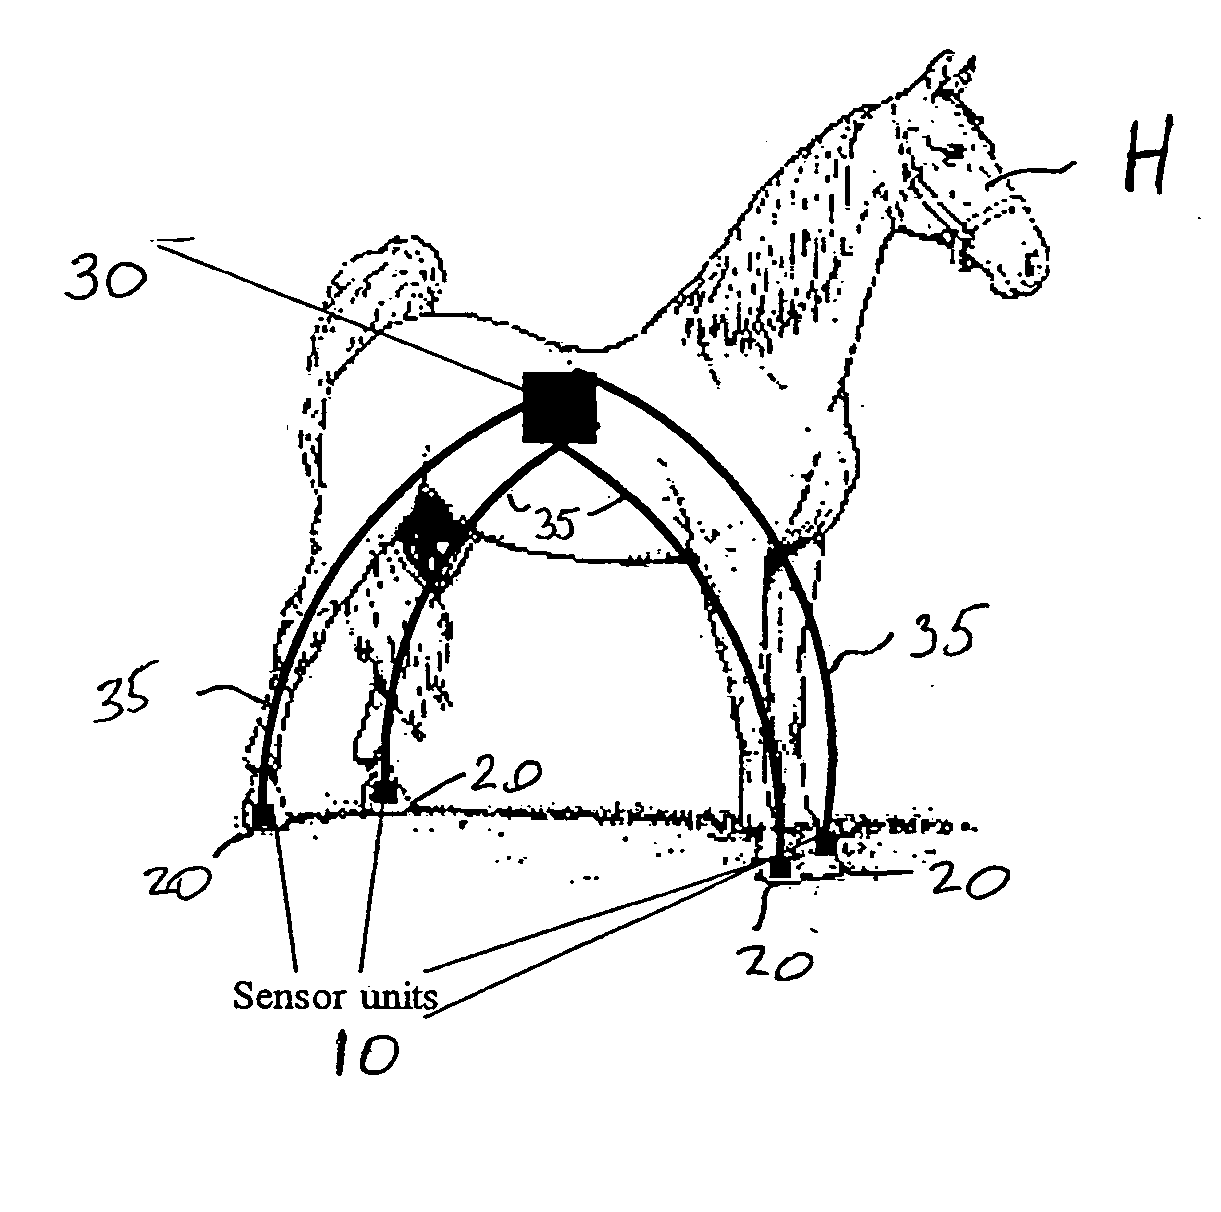 Method and apparatus for evaluating animals' health and performance